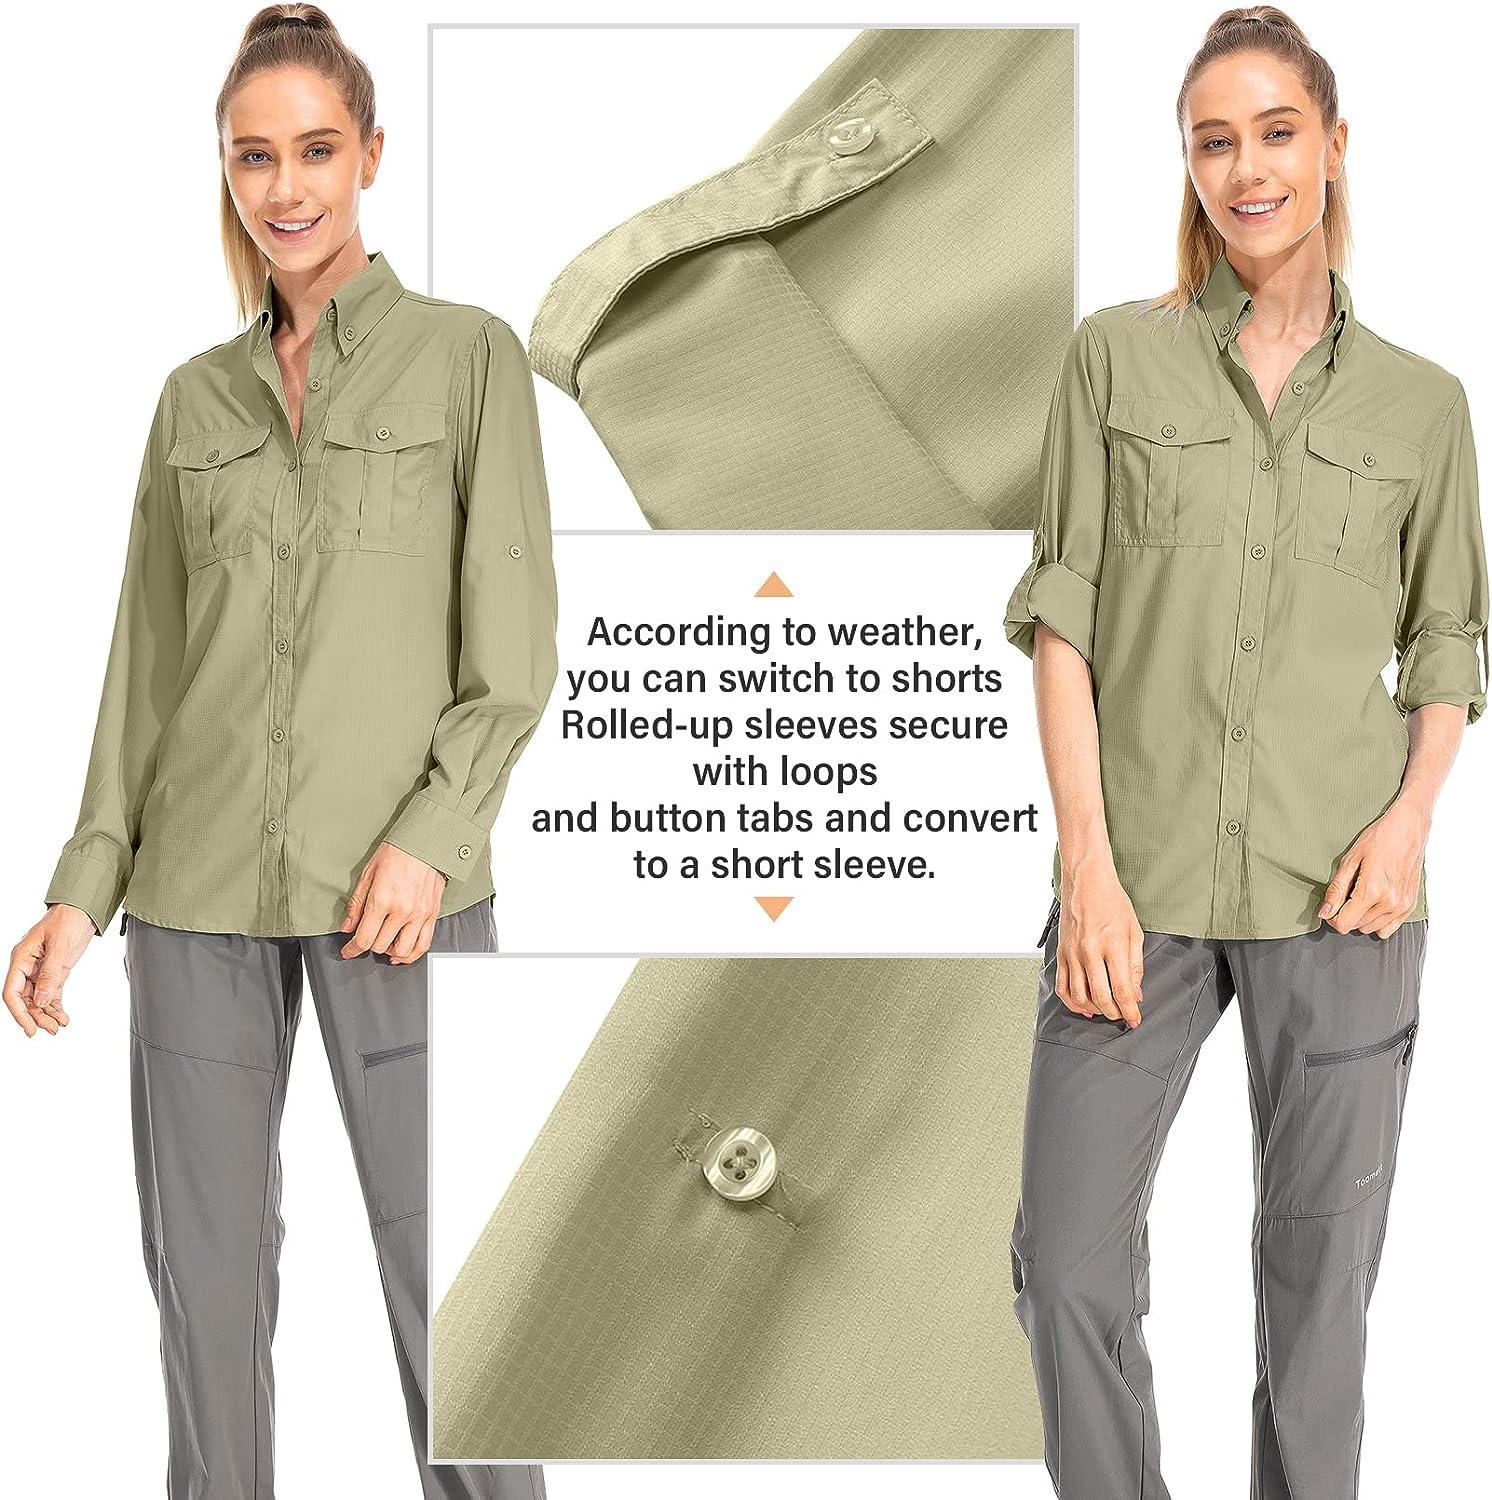 Women's Quick Dry Sun UV Protection Convertible Long Sleeve Shirts for  Hiking Camping Fishing Sailing #5019,Olive Green,XL